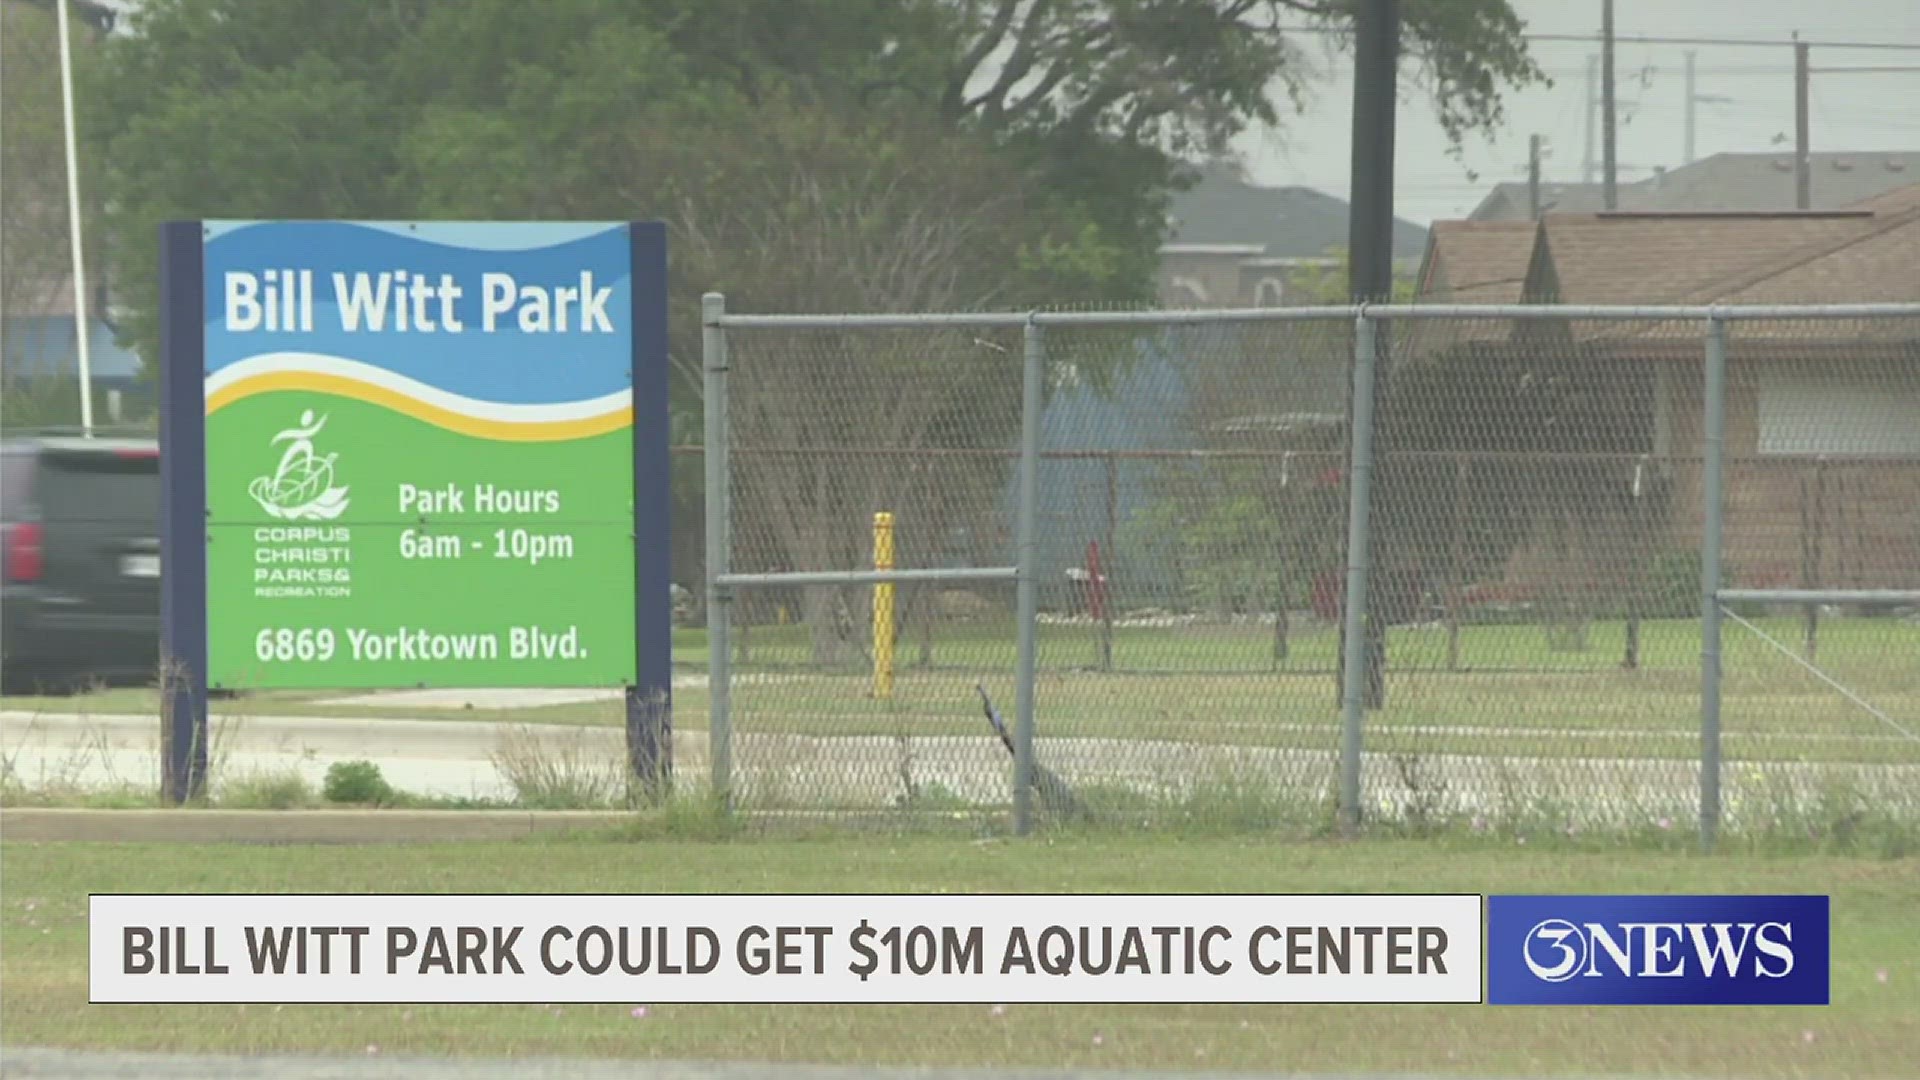 Council was scheduled to vote on building a new pool at Bill Witt Park on Tuesday, but shelved the issue until April.